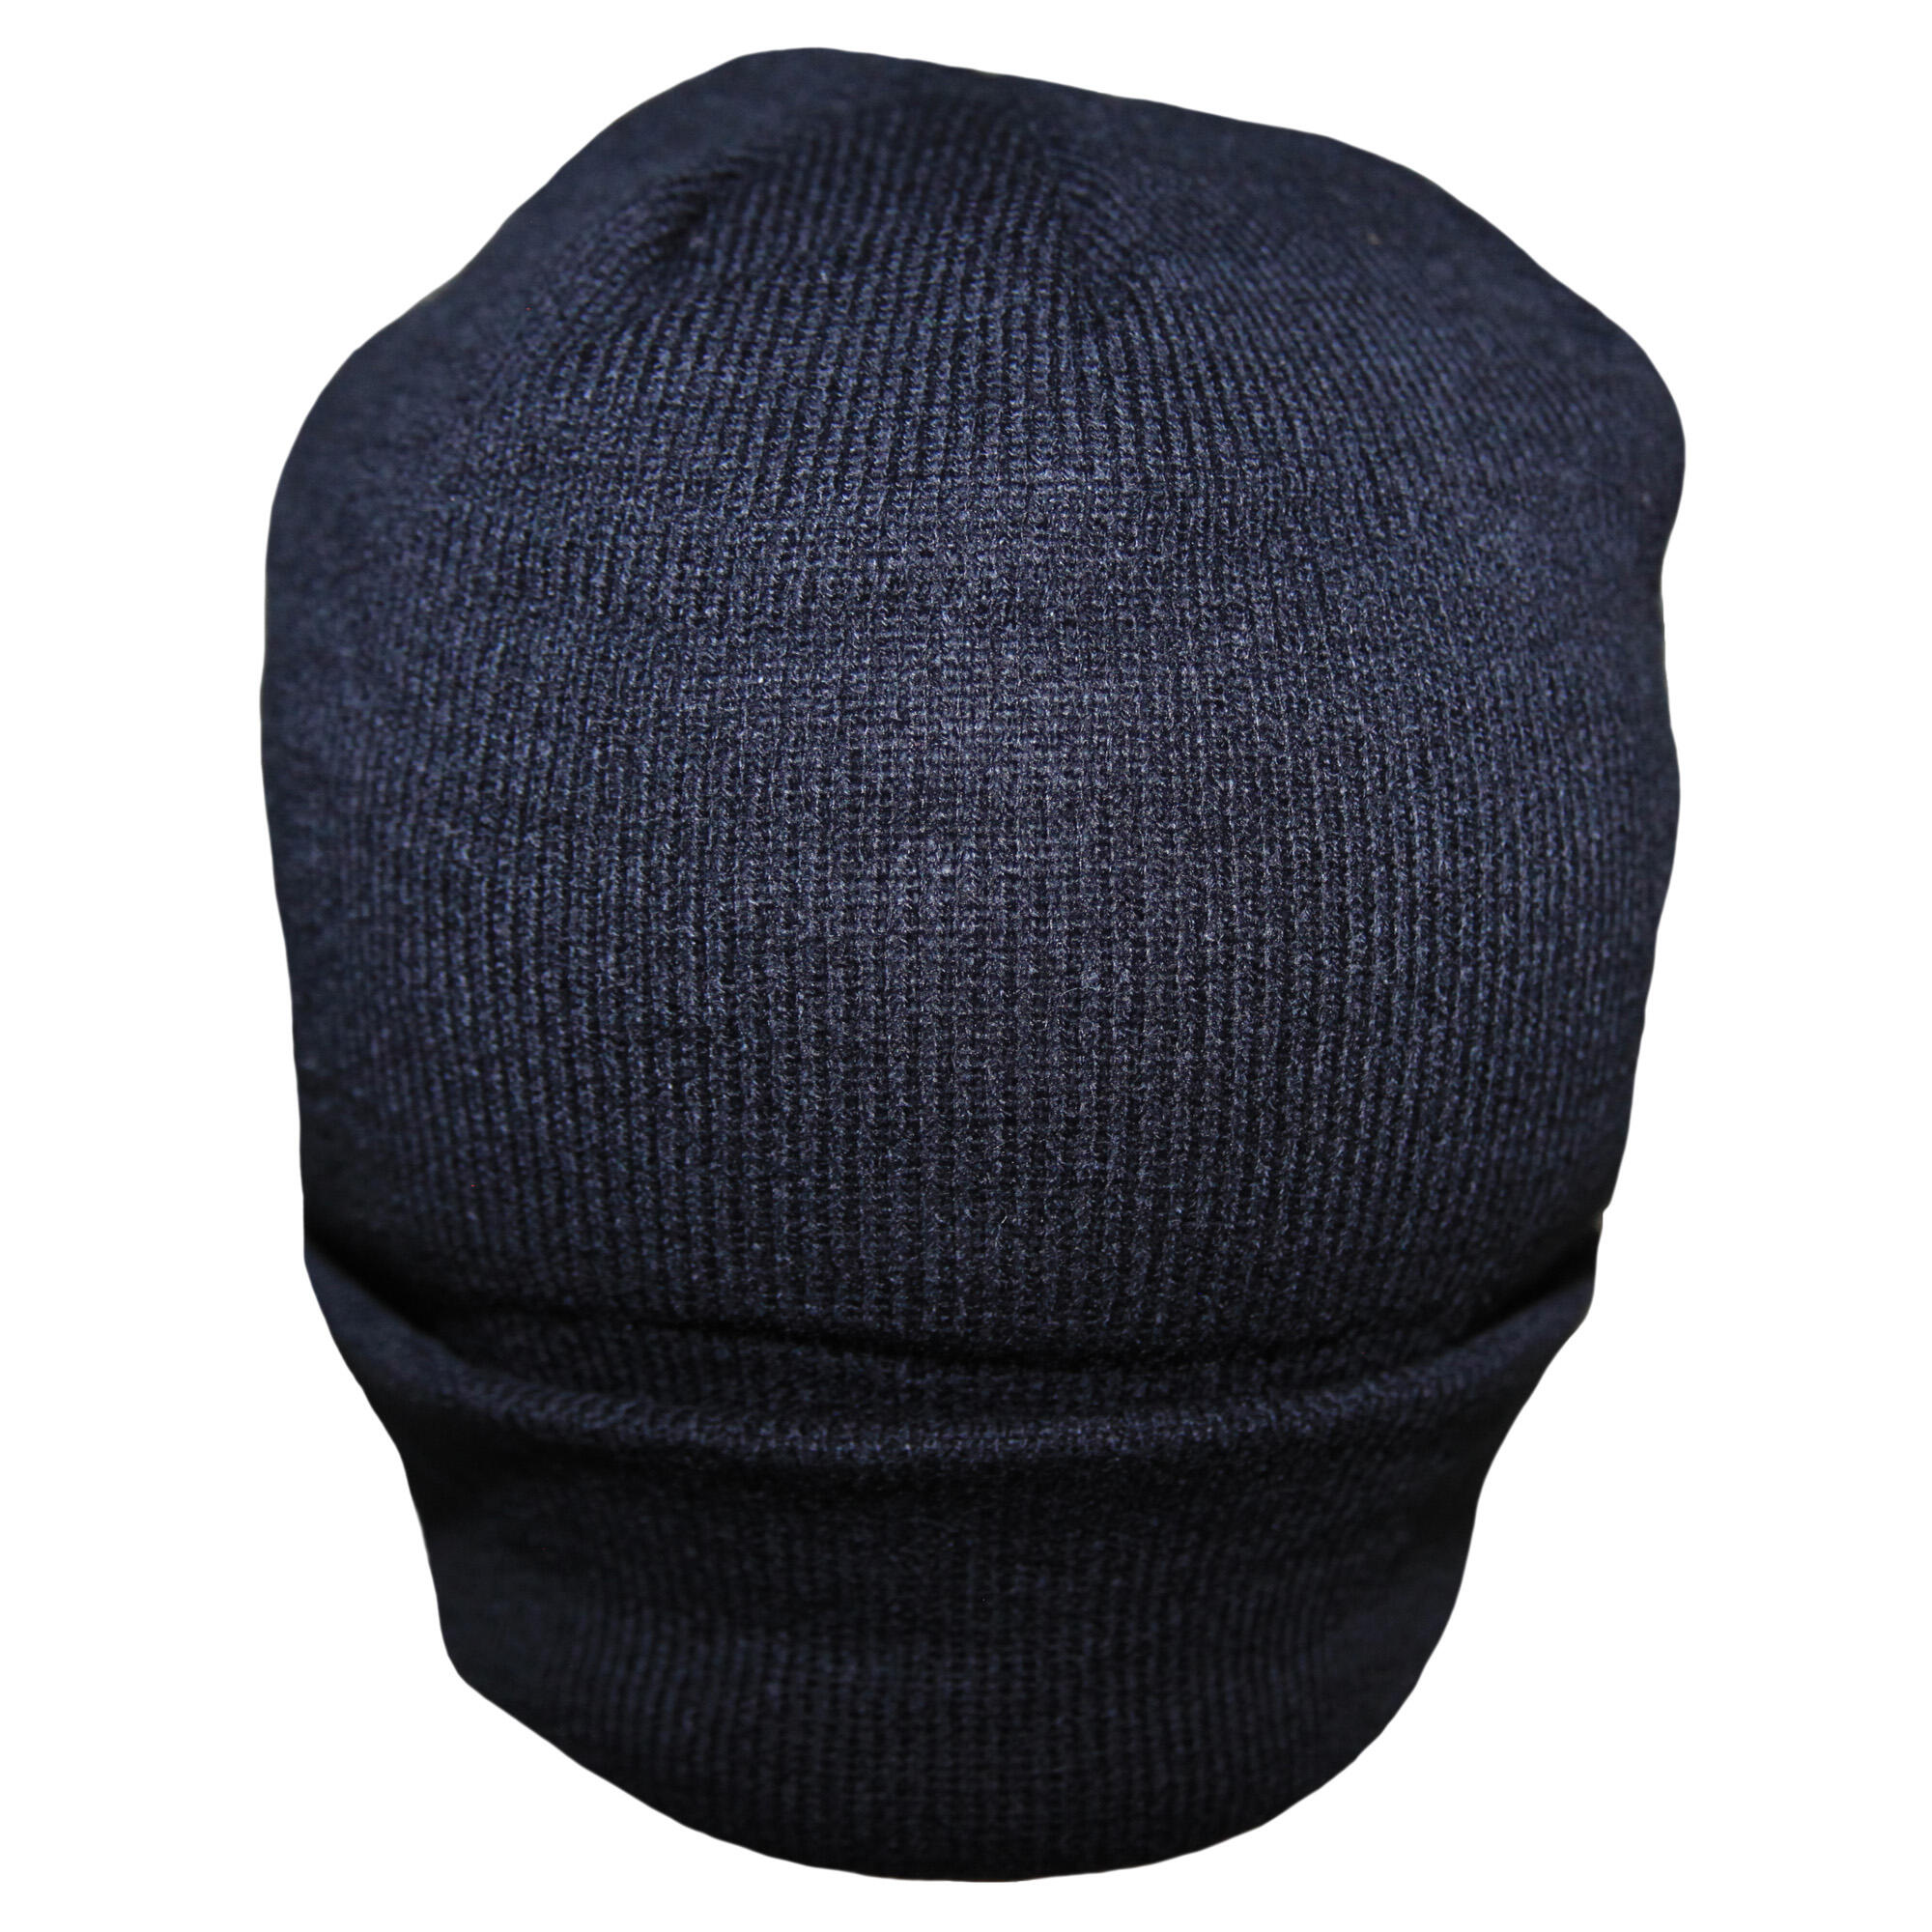 Mens Thinsulate Thermal Winter Hat (Navy) 2/4